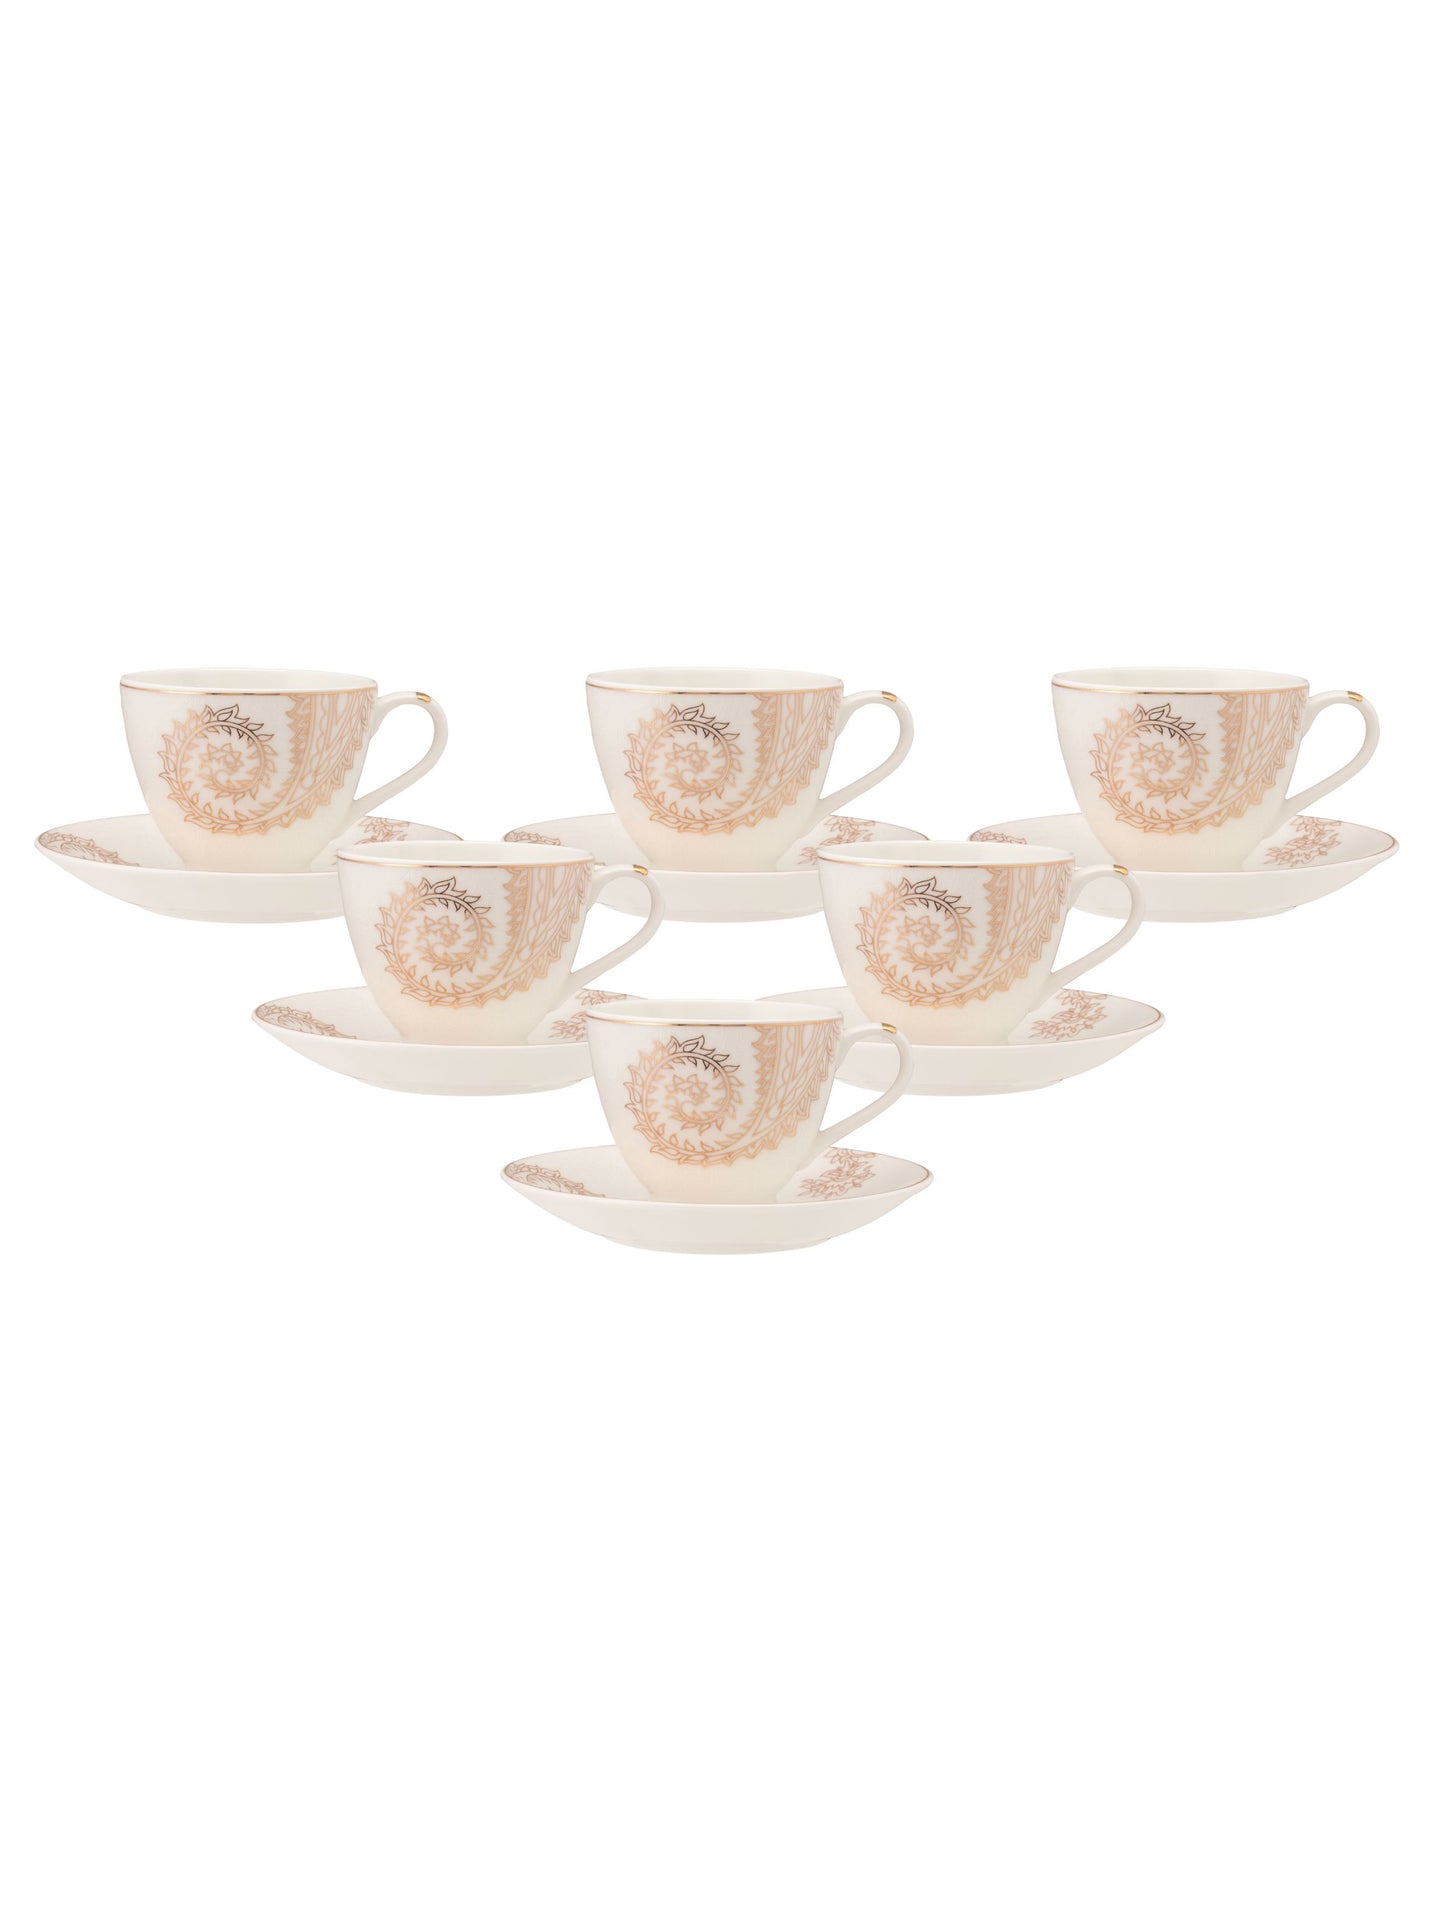 JCPL King Crysta Cup & Saucer, 160ml, Set of 12 (6 Cups + 6 Saucers) (CR404)